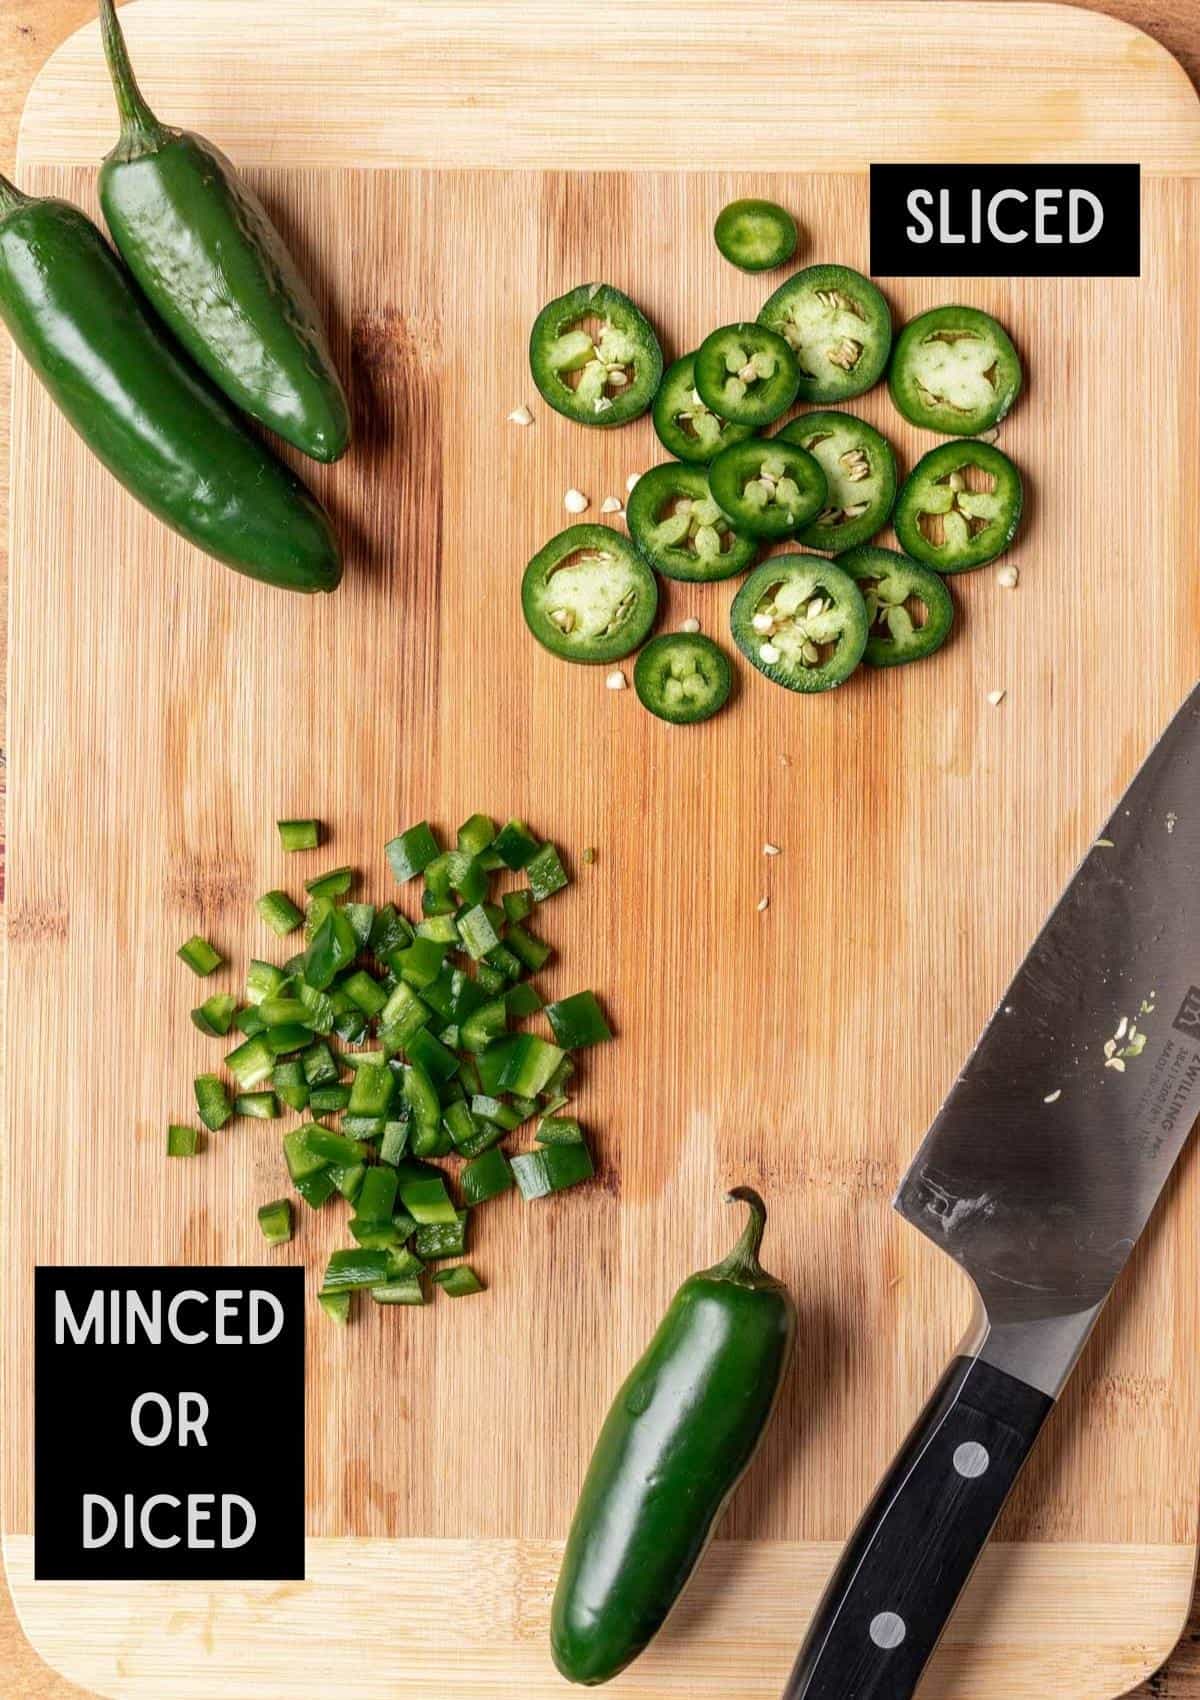 Examples of minced (or diced) and sliced jalapeños on a cutting board.